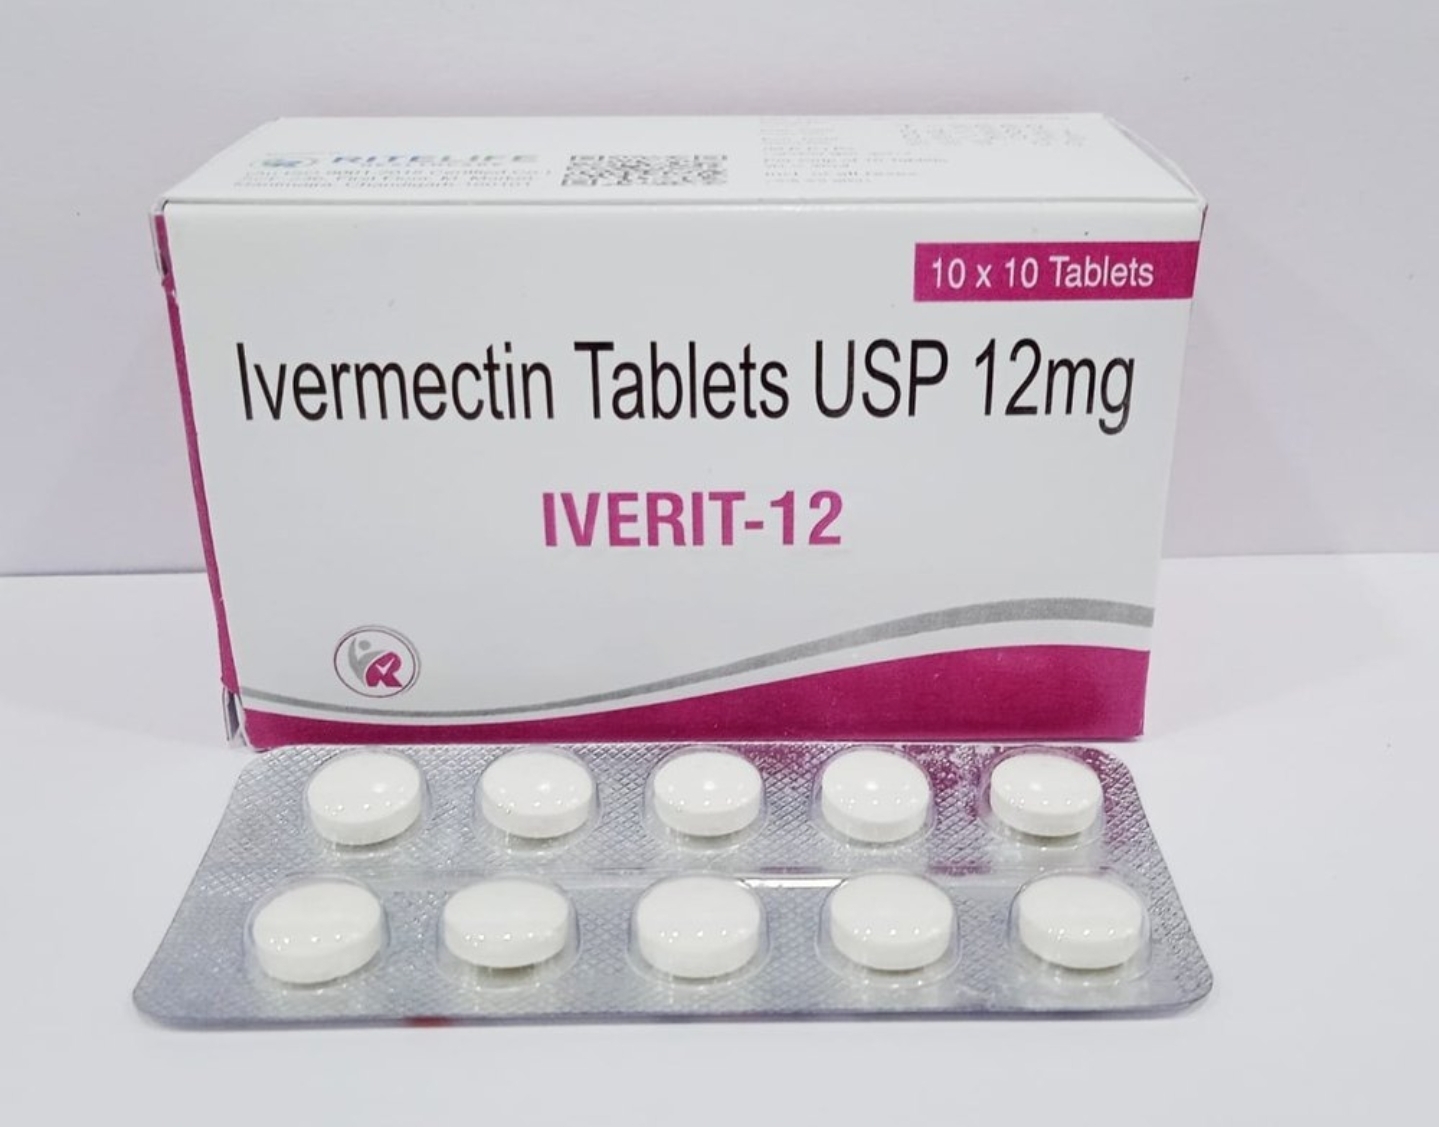 Ivermectin Cuts Mortality by 92%